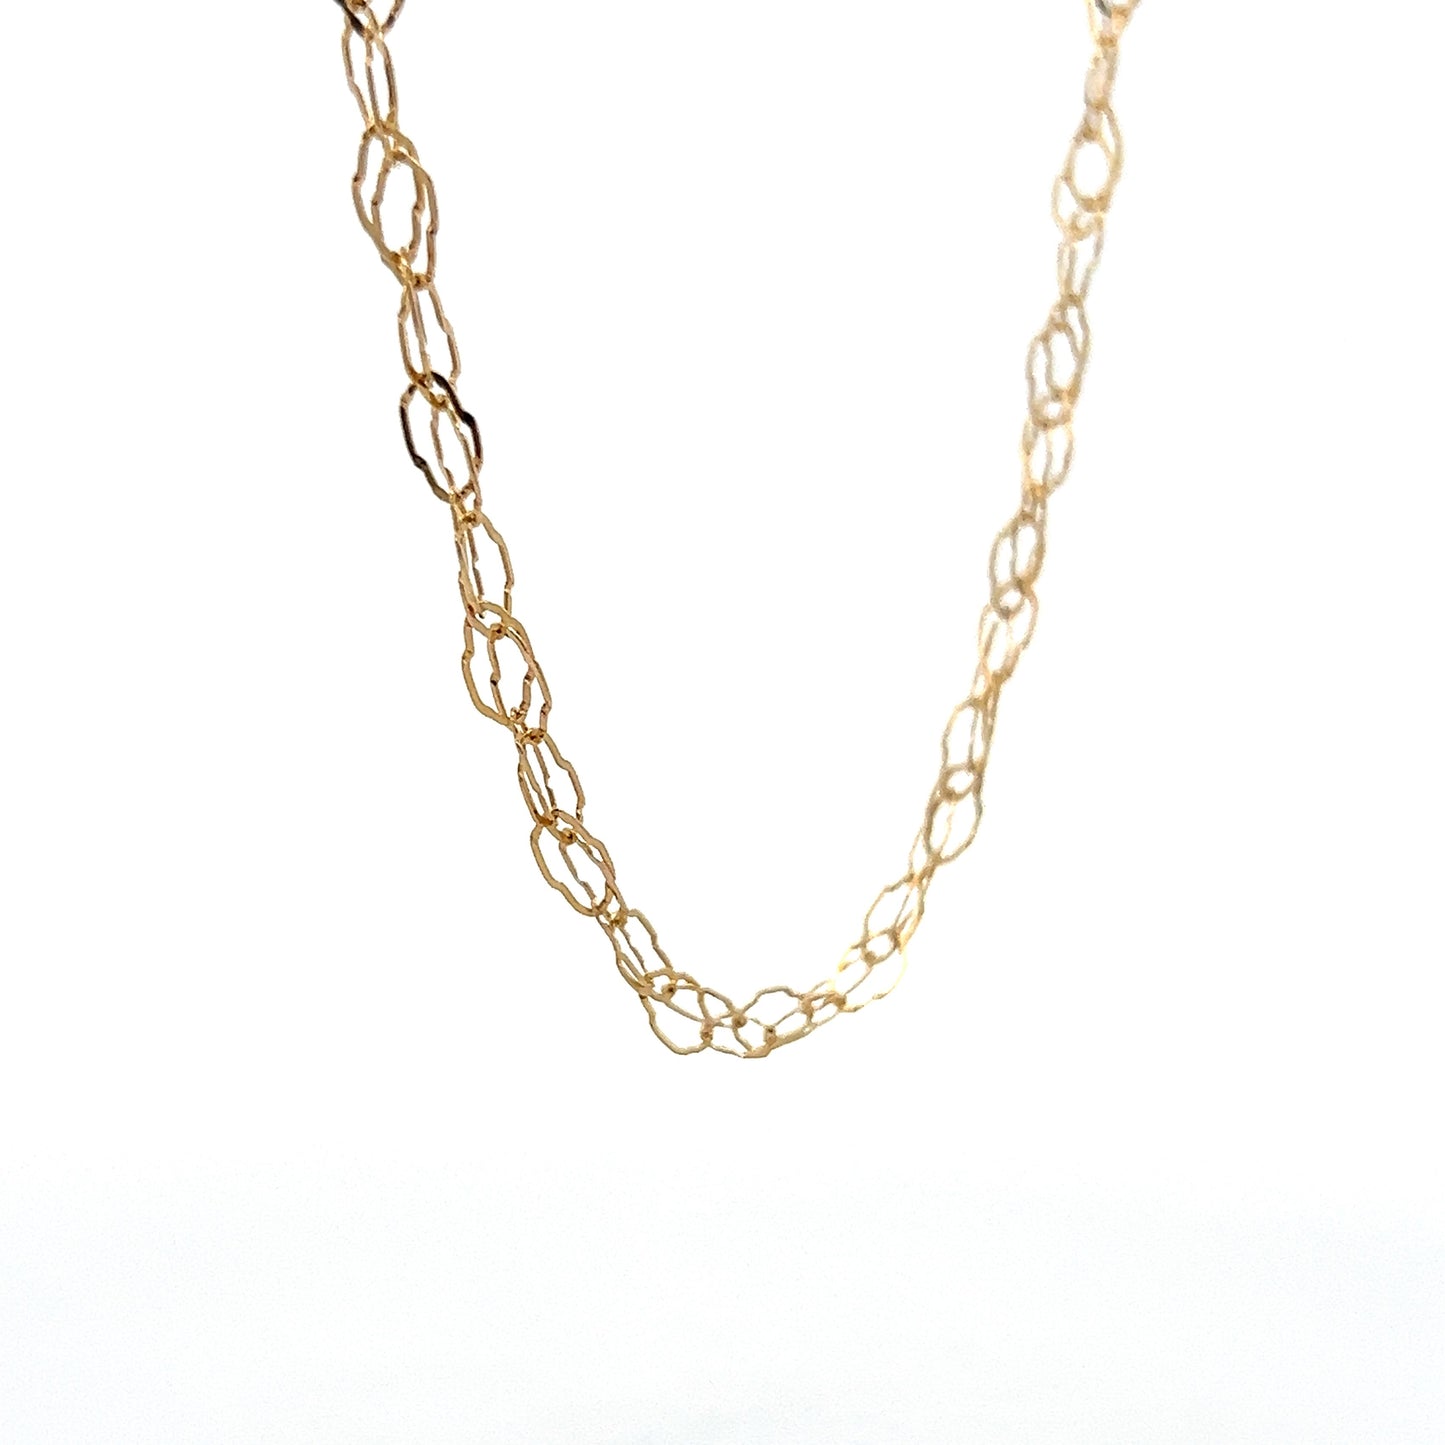 Organic Oval Link Chain Necklace in 14k Yellow Gold